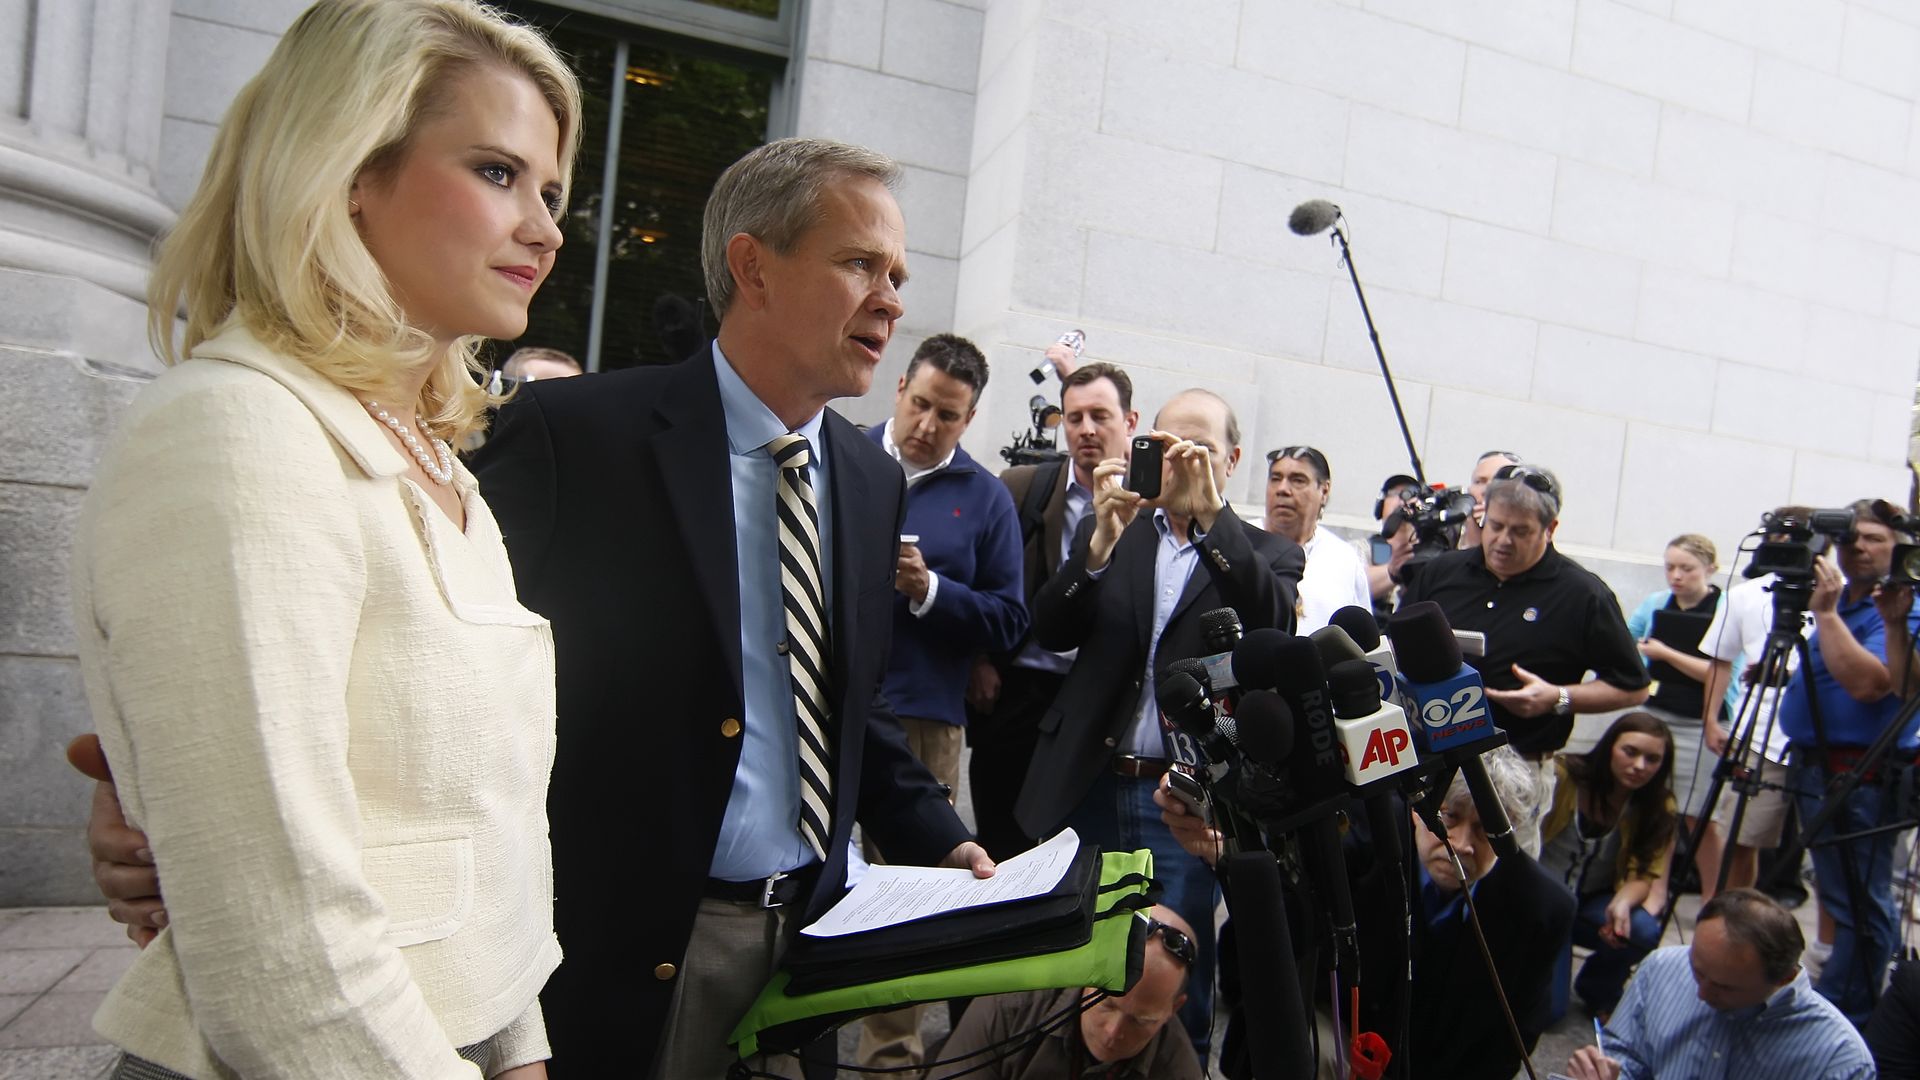 Blonde woman in front of press. 